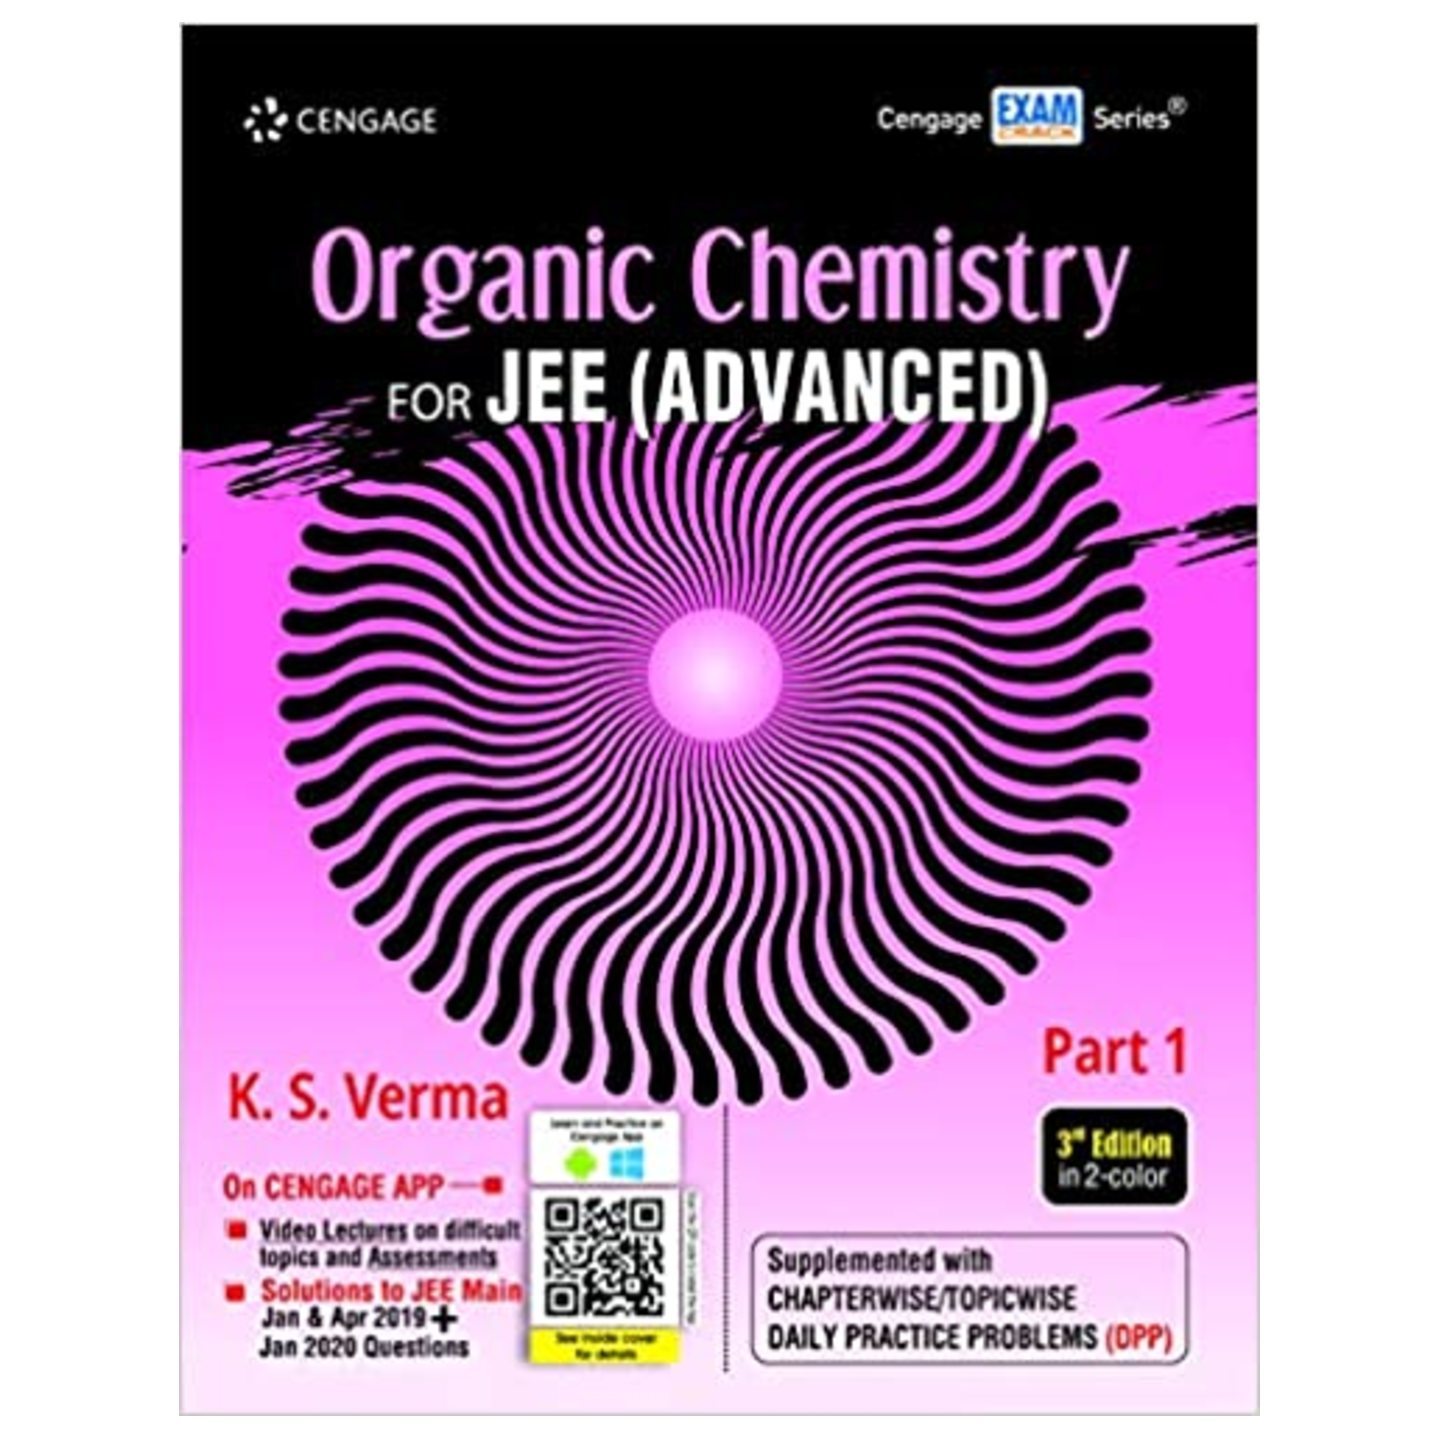 CENGAGE Organic Chemistry for JEE Advanced Part 1